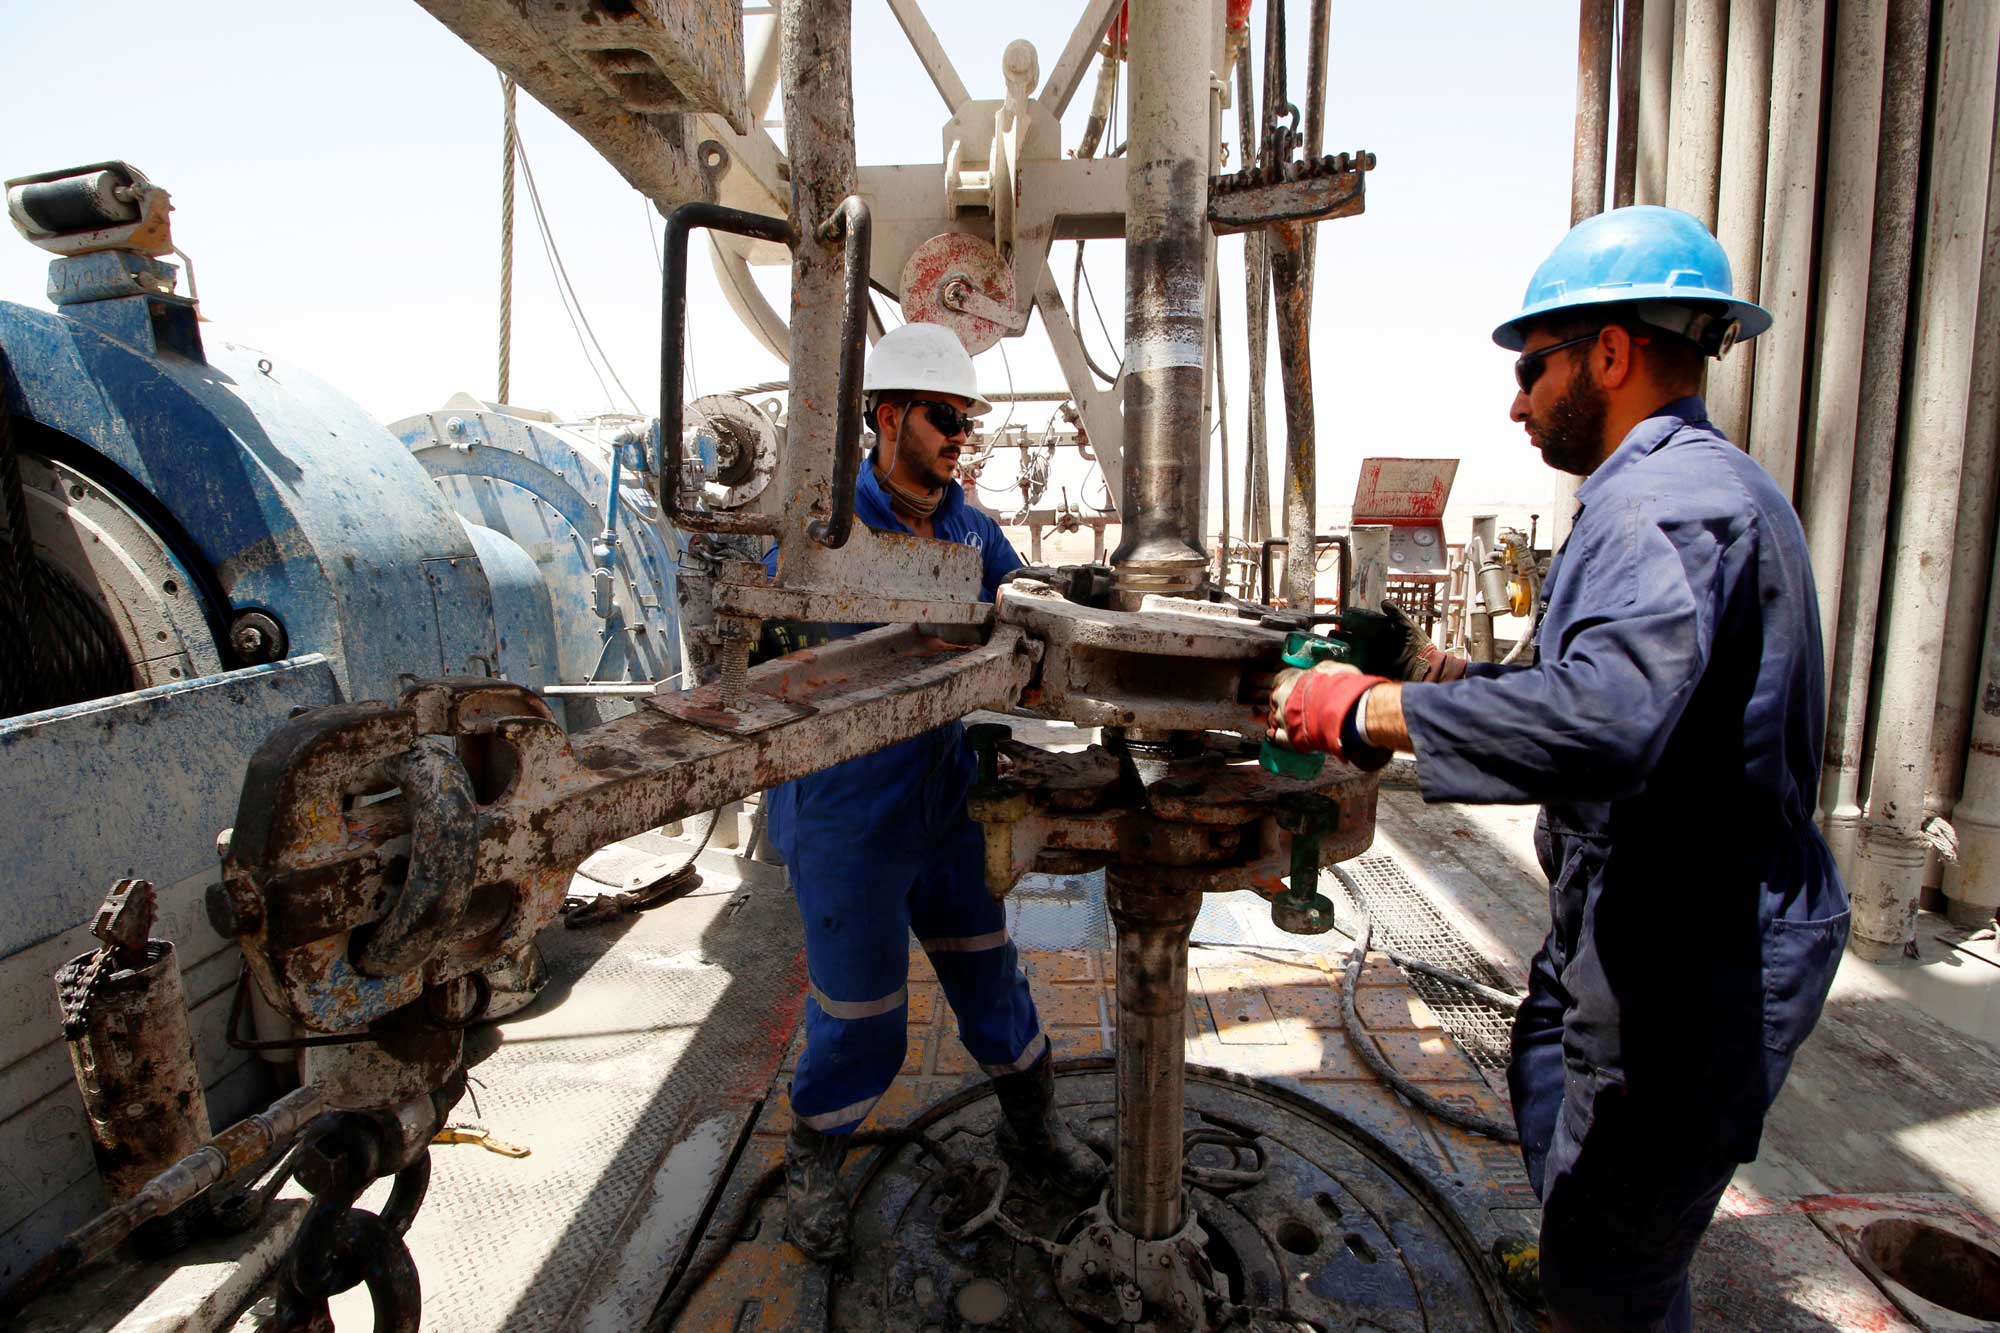 Iraq bumps up the date for awarding new oil contracts to April 15